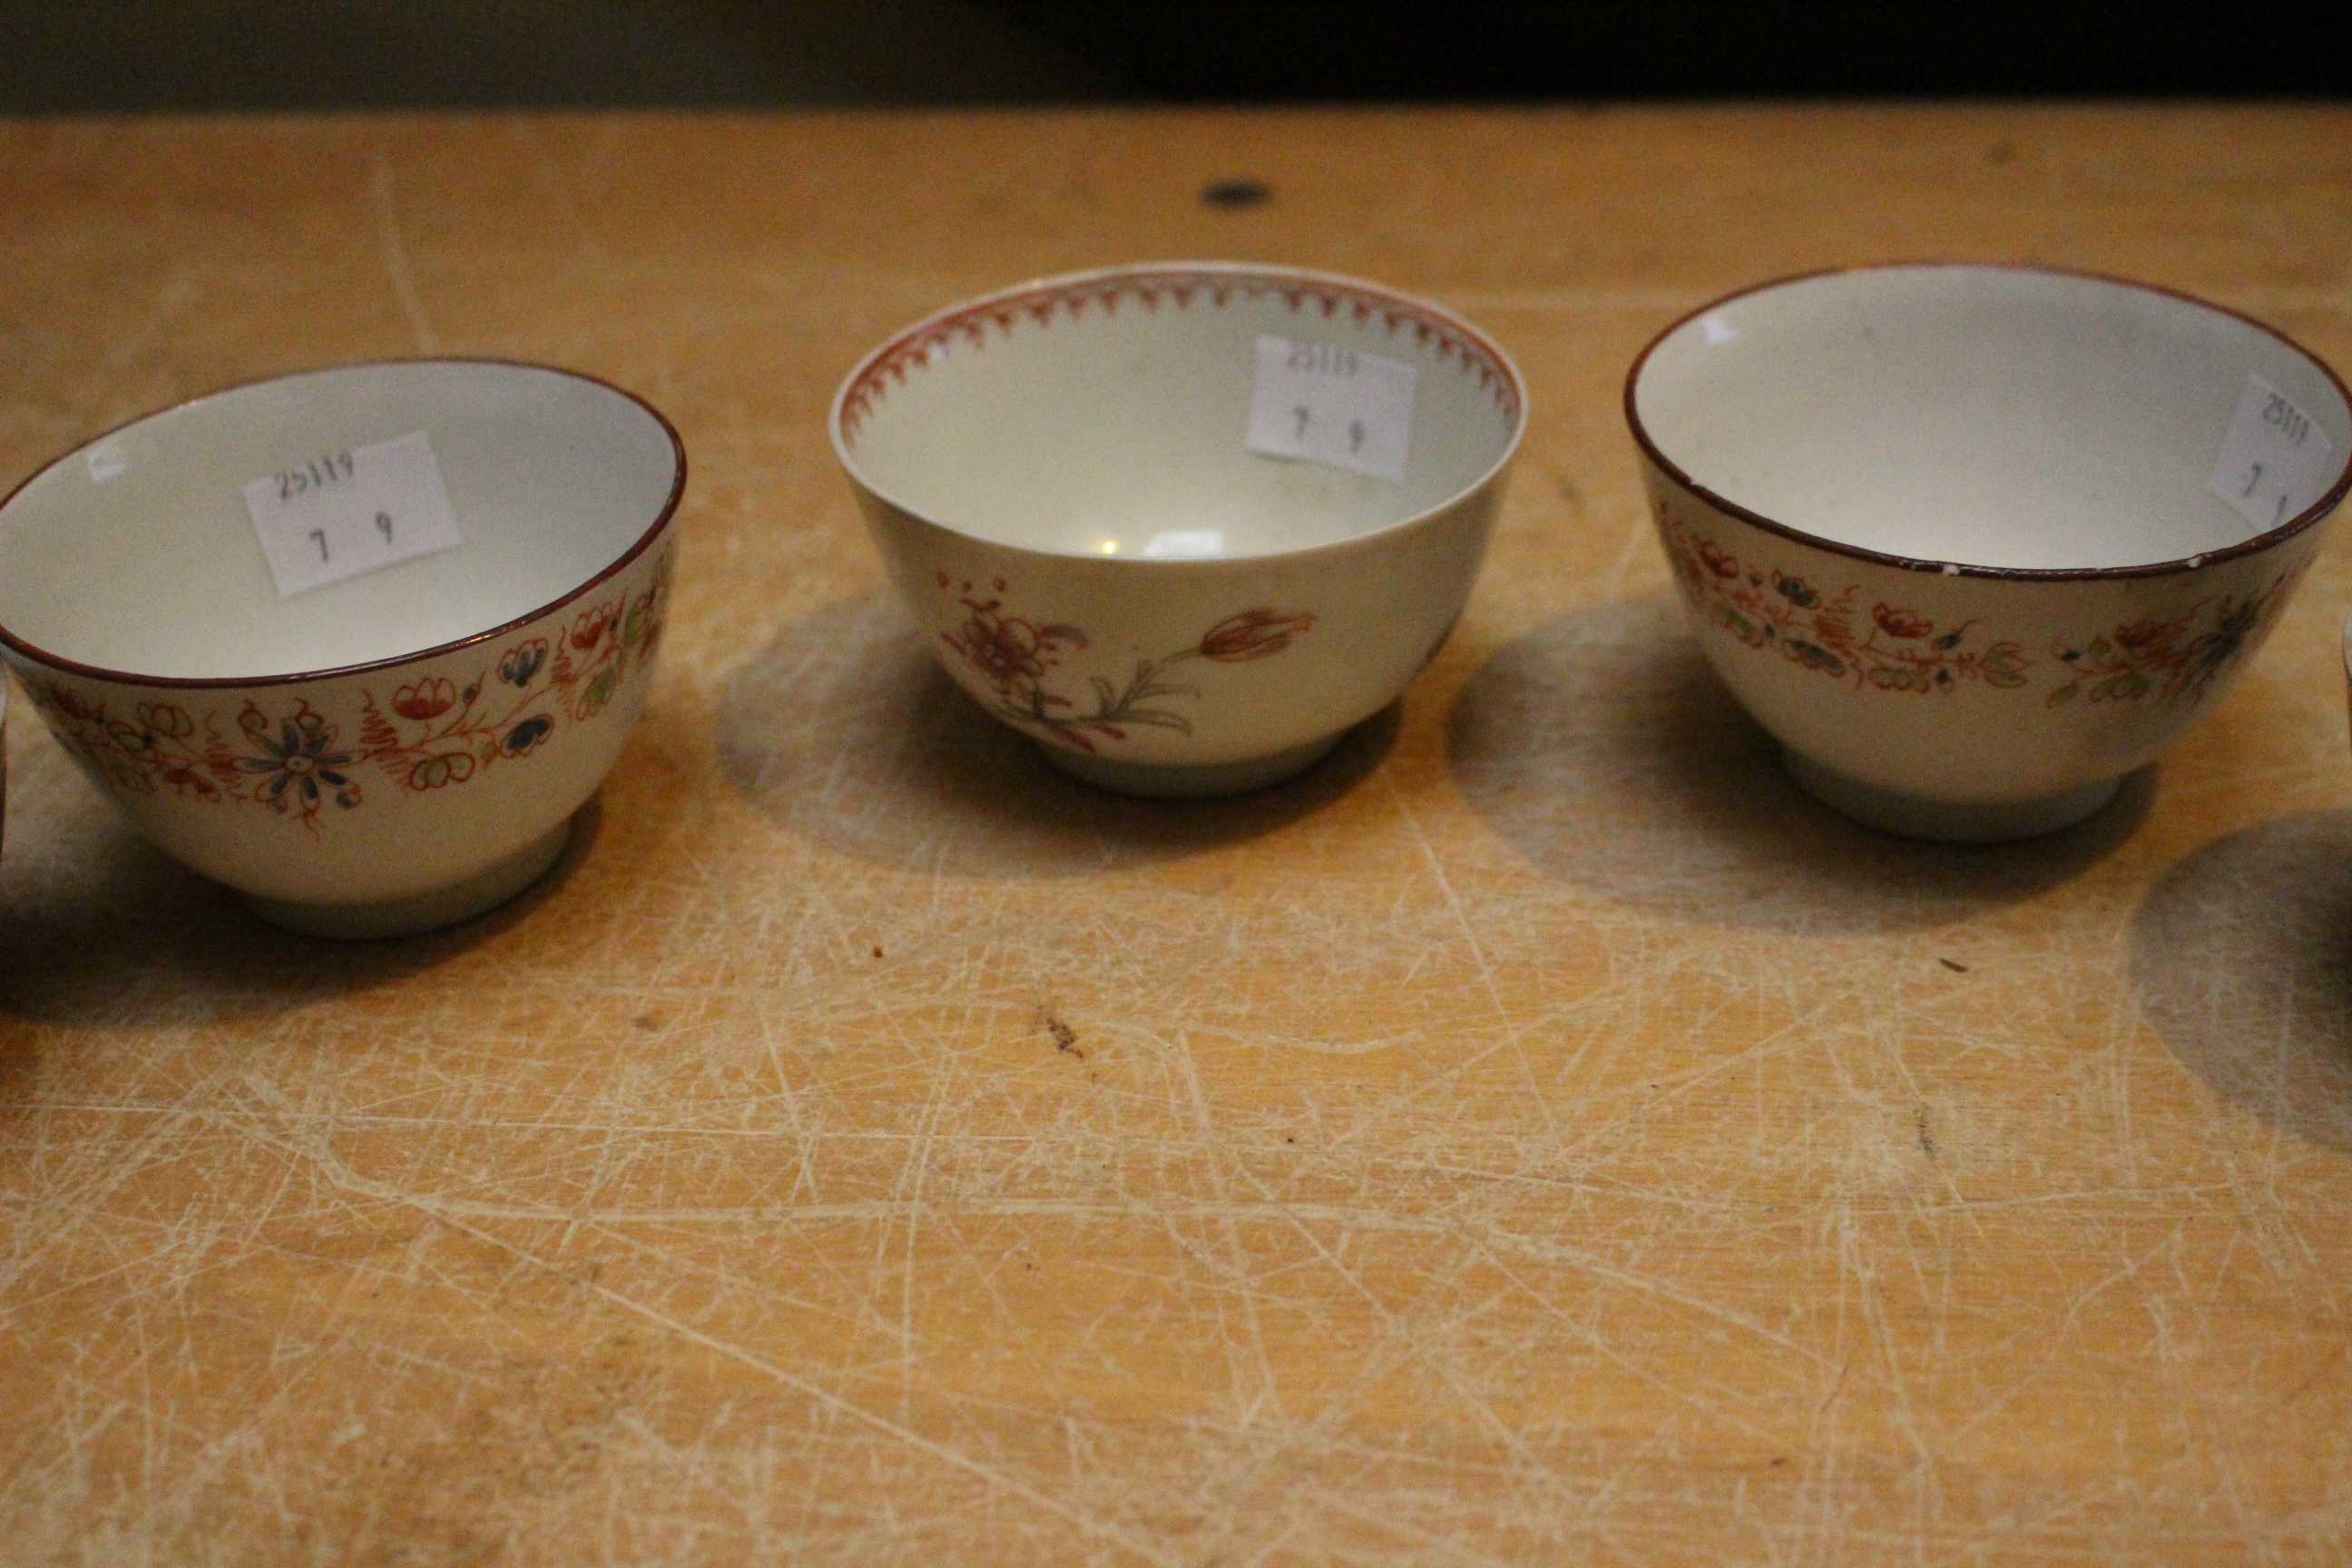 A set of three late 18th century Newhall tea bowls painted with flower sprays in famille rose - Image 3 of 3